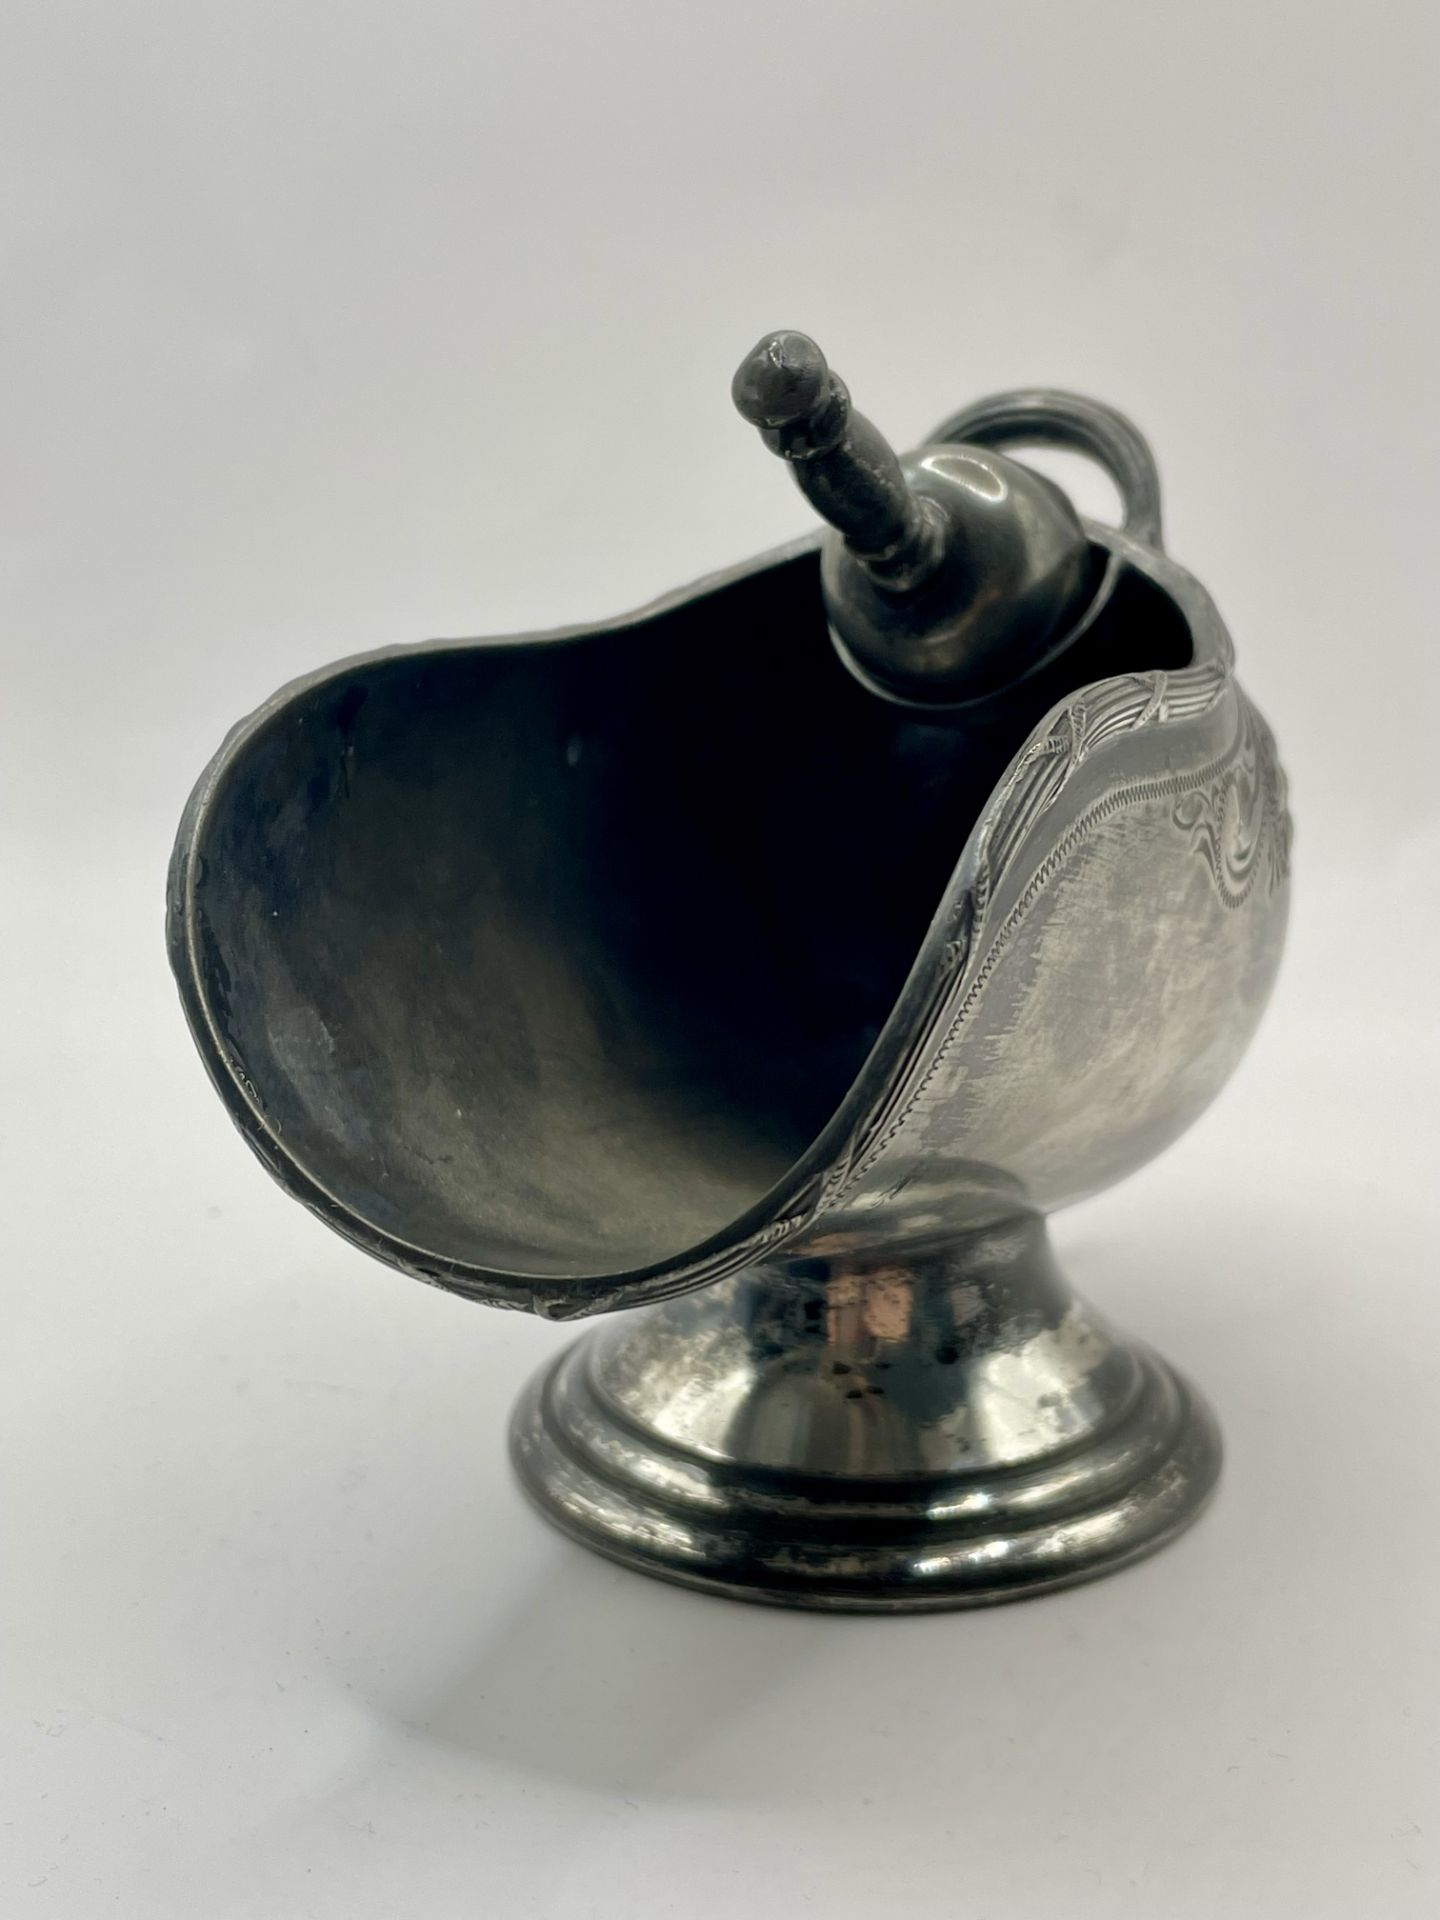 Art Nouveau 1920s Pewter scoop and coal scuttle ornament - Image 4 of 10